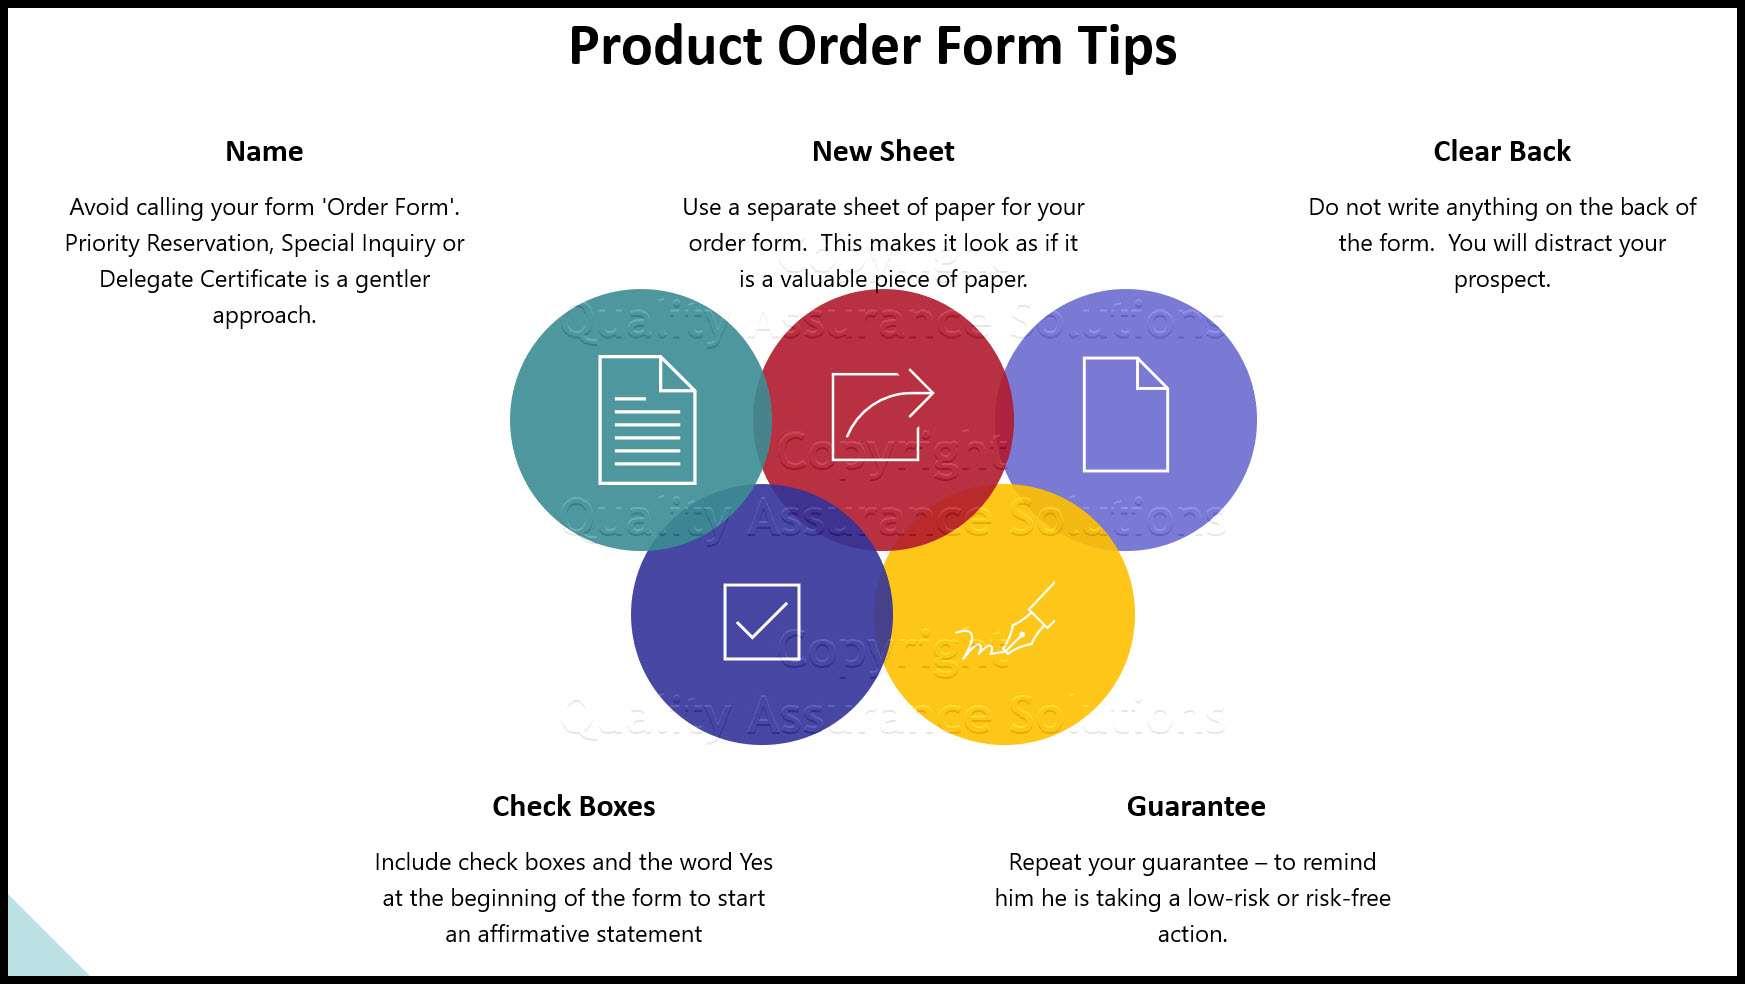 10 Rules to creating your magnetic, irresistible product order form template.